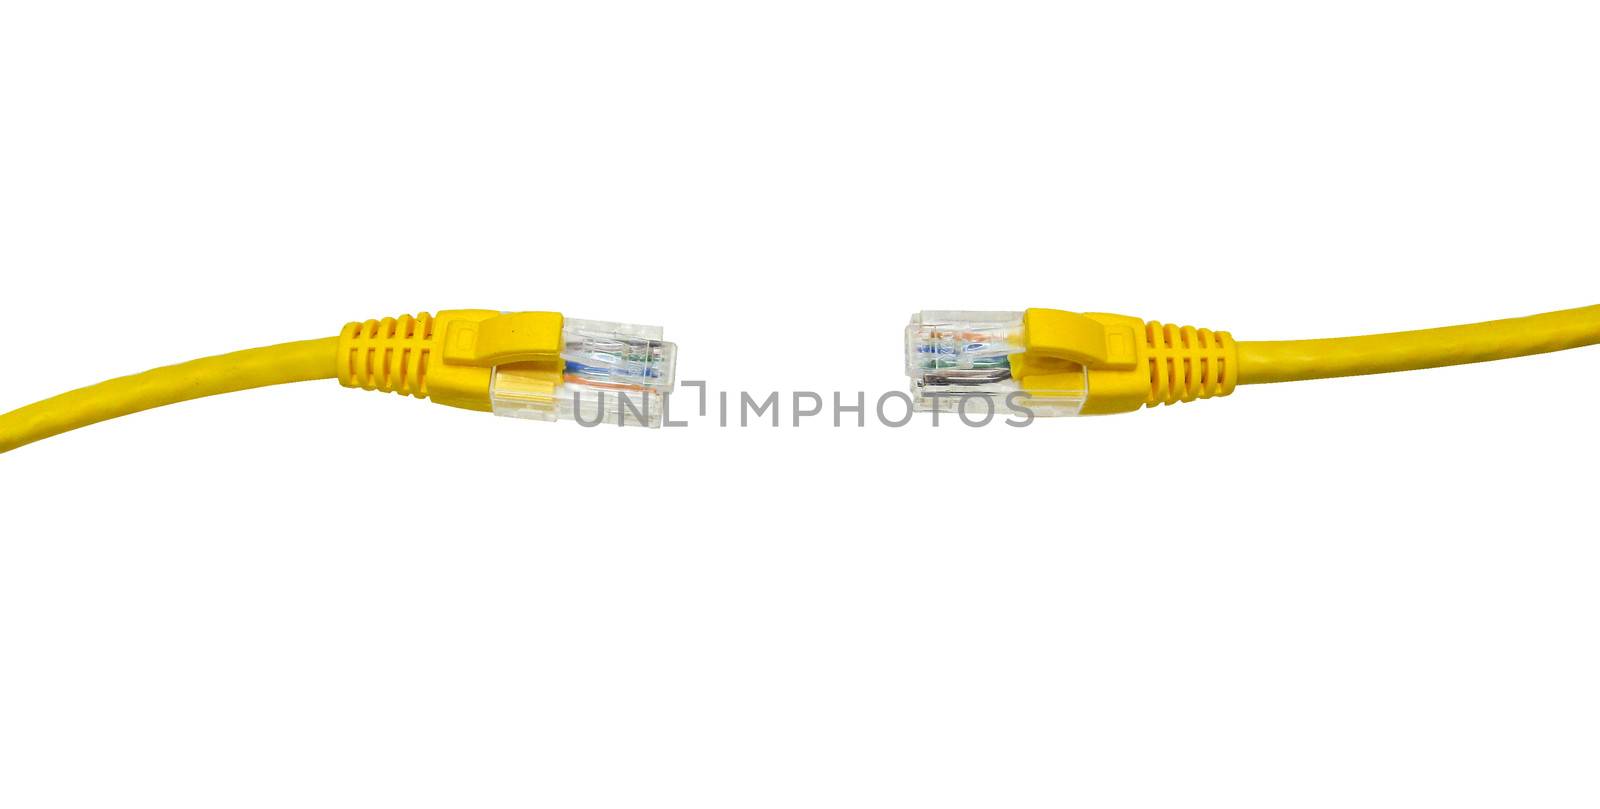 network cables on the white background